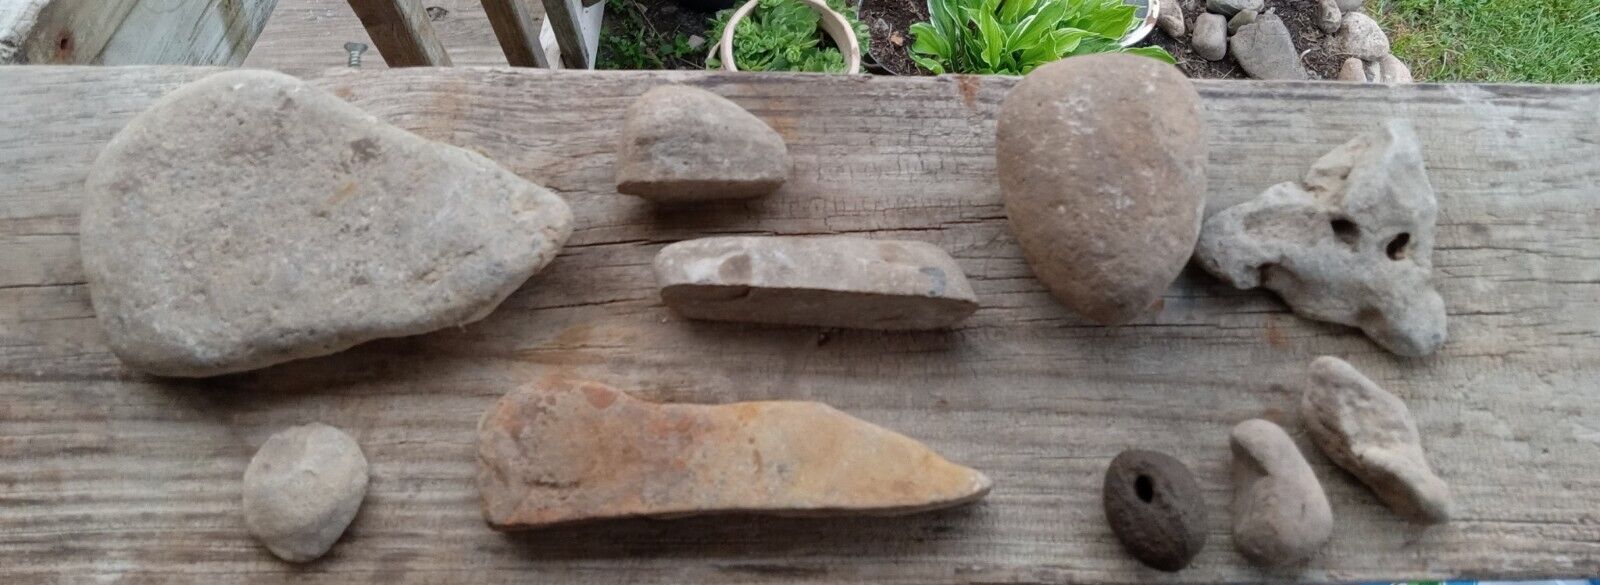 Native American Paleo Indian Artifacts Large Lot Of Stone Tools Franklin Co IN